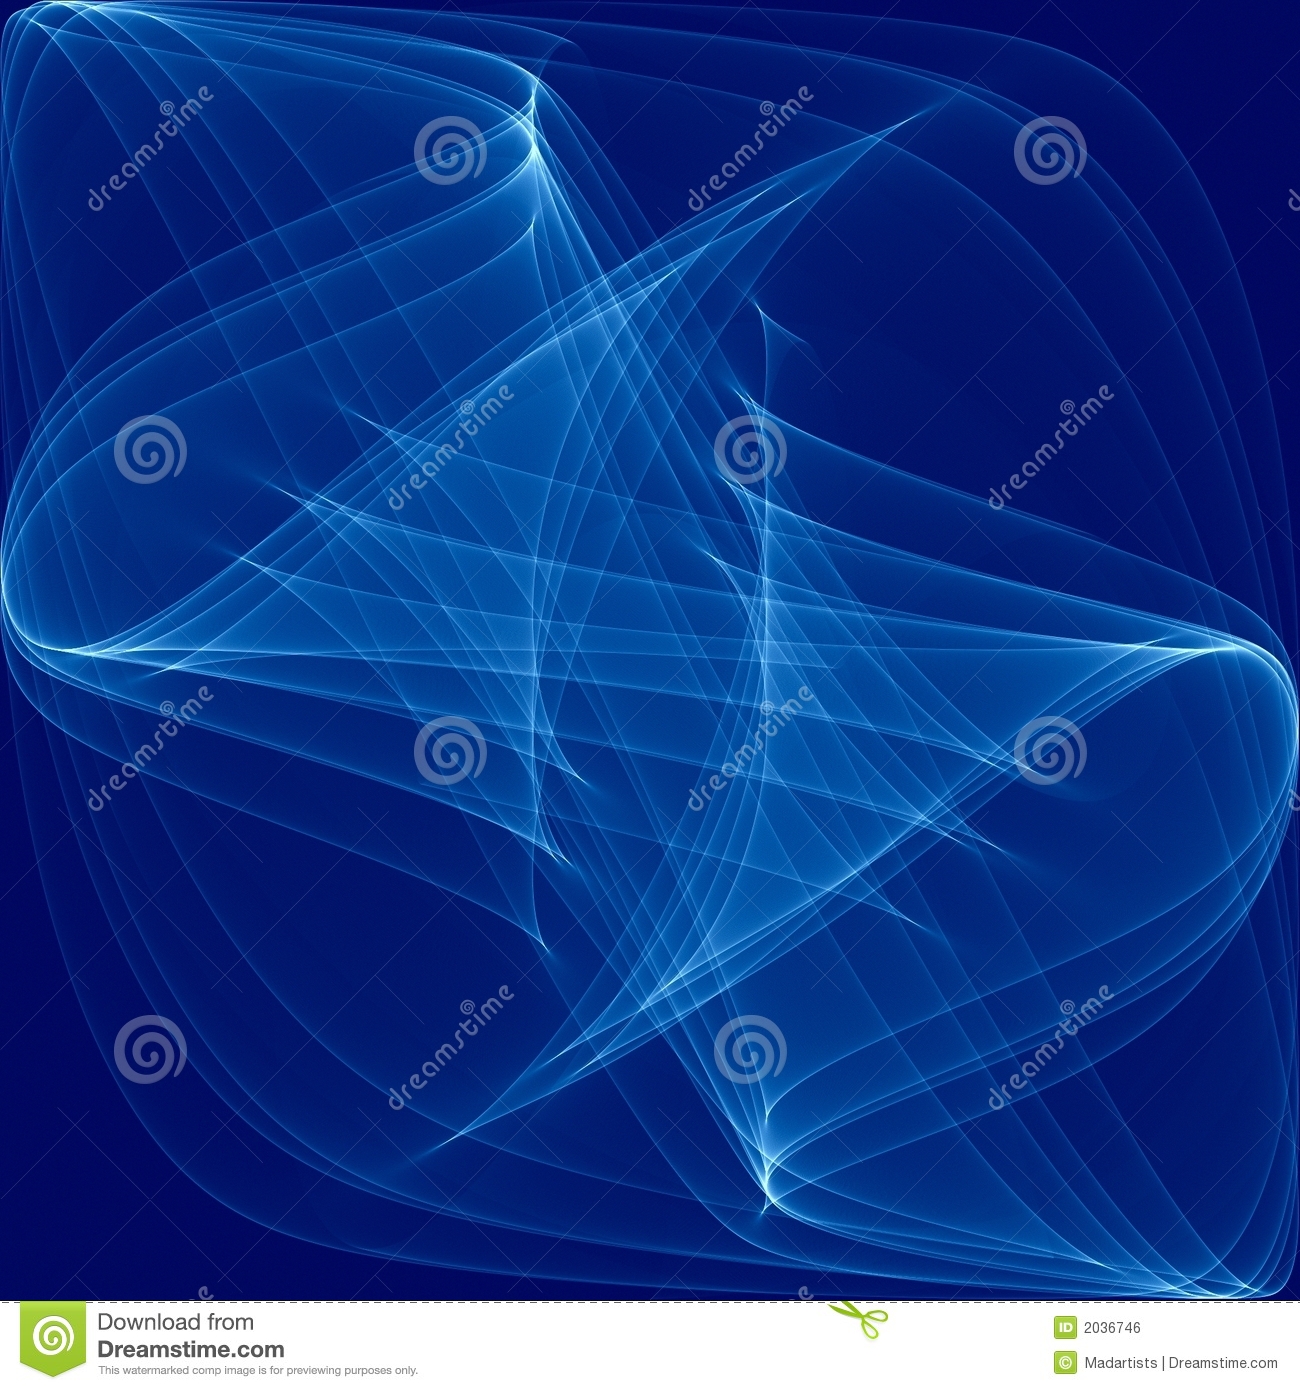 An Abstract Texture Illustration Of Lines Twirling And Swirling In